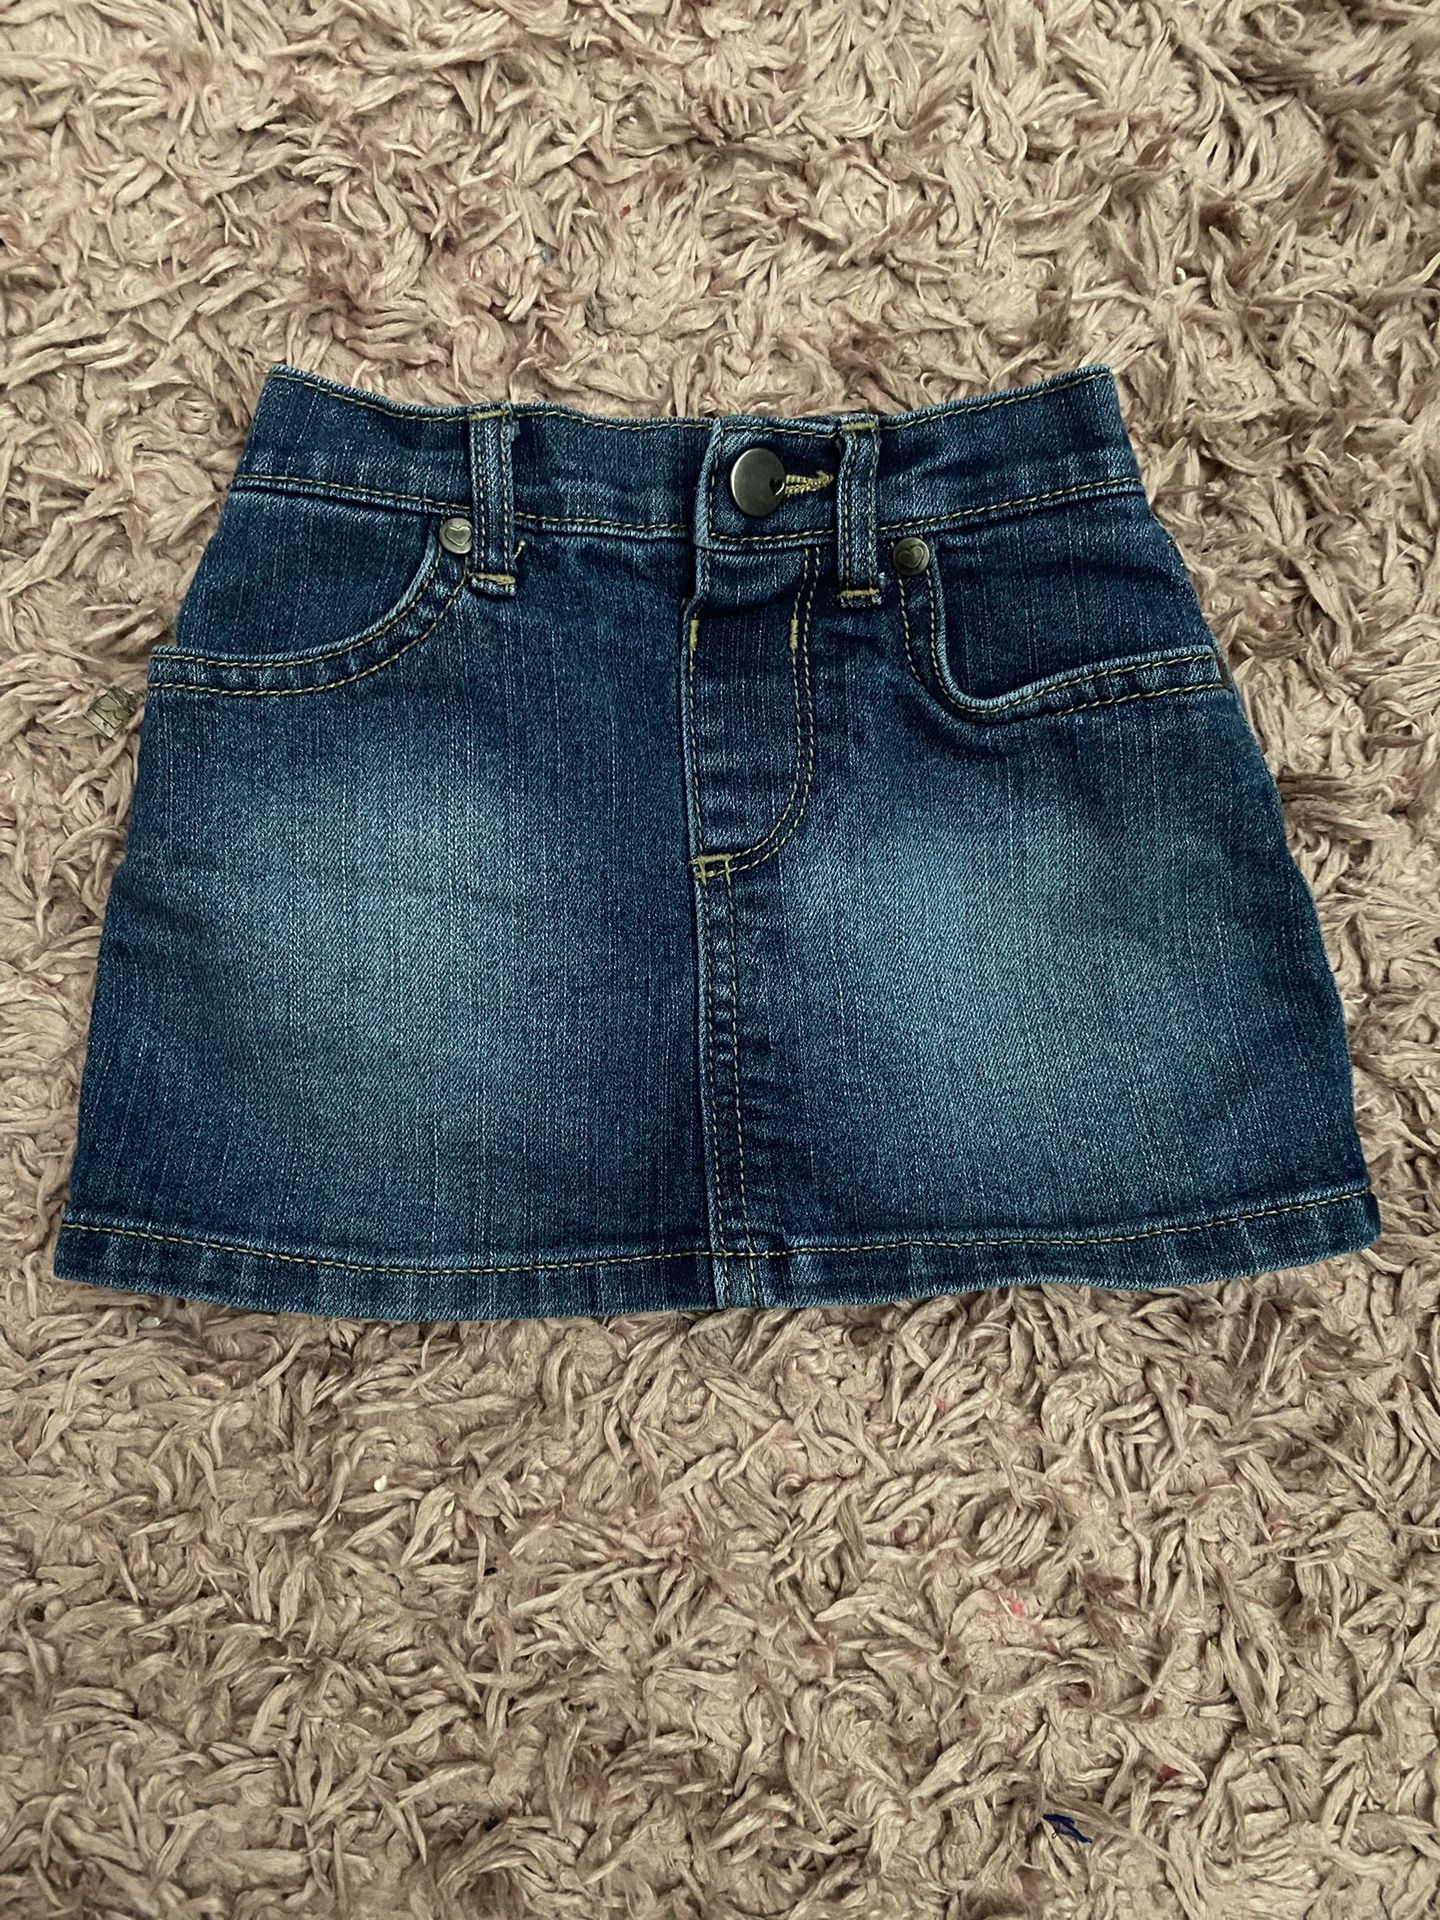 Toddler Skirt With Shorts Size 18-24 Months 